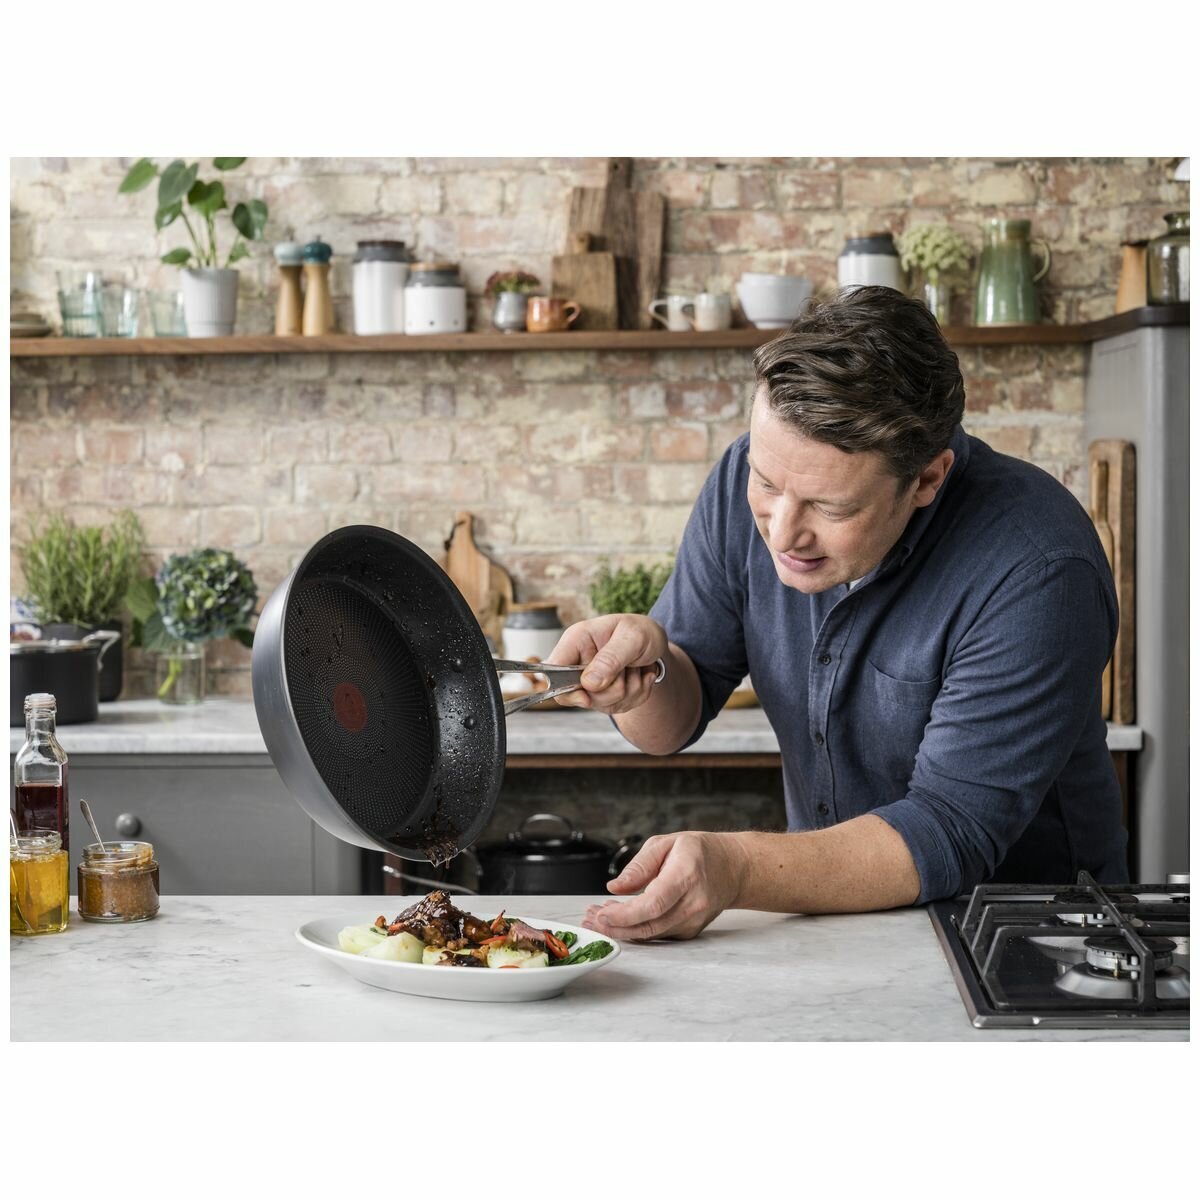 https://www.winnings.com.au/ak/4/6/3/4/46342ab241a08605e51f2c41408e310e652f4b65_tefal_jamie_oliver_cooks_classics_induction_non_stick_hard_anodised_2_piece_frypan_set_h912s217-high.jpeg